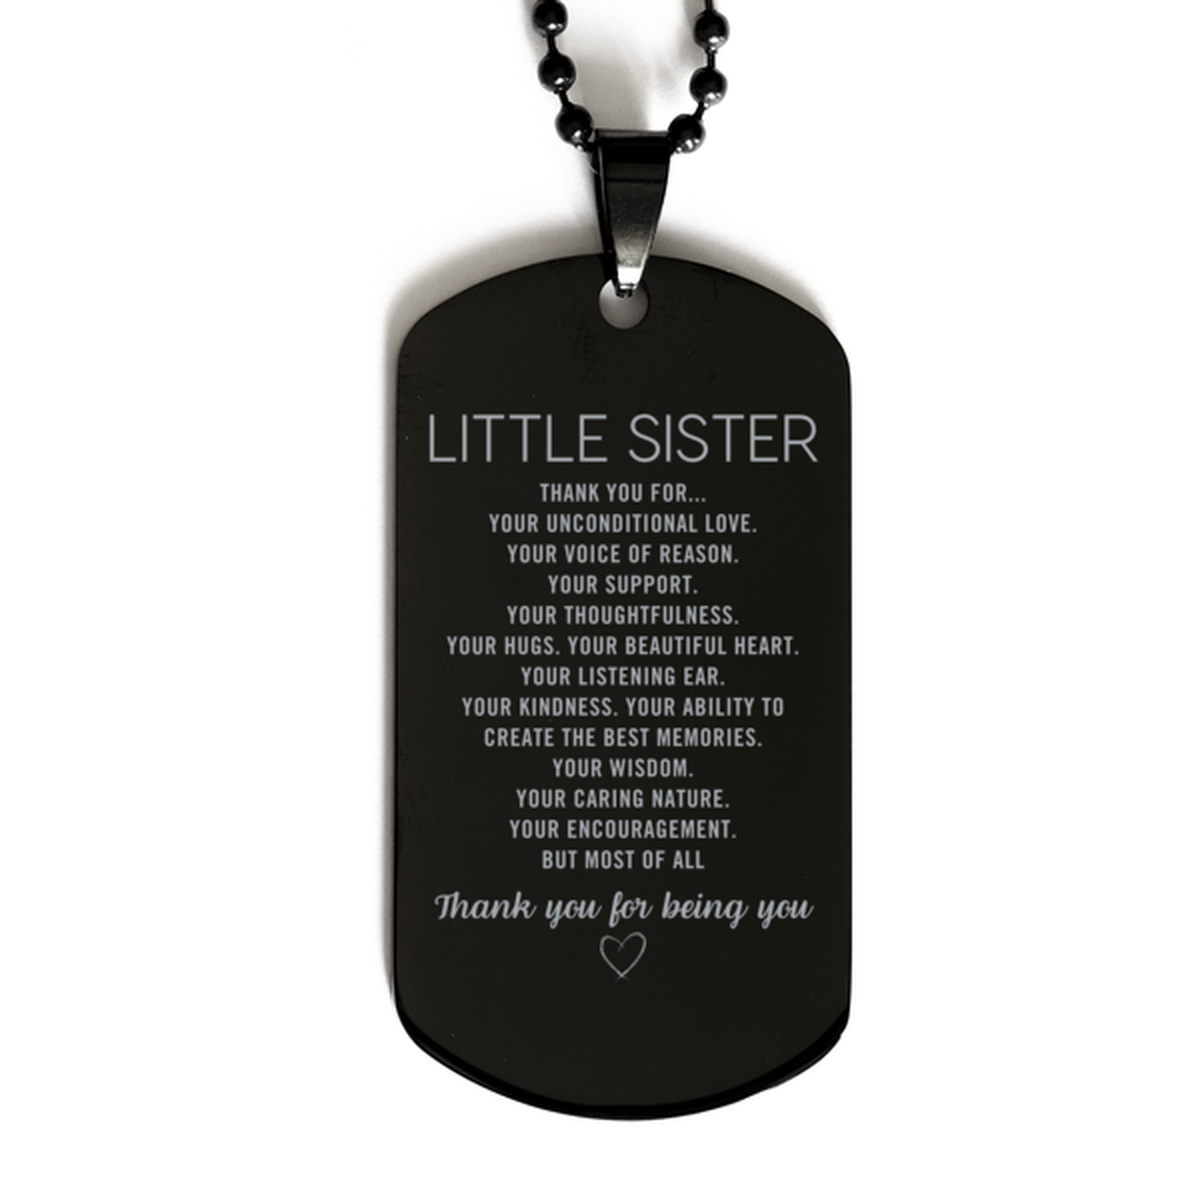 Little Sister Black Dog Tag Custom, Engraved Gifts For Little Sister Christmas Graduation Birthday Gifts for Men Women Little Sister Thank you for Your unconditional love